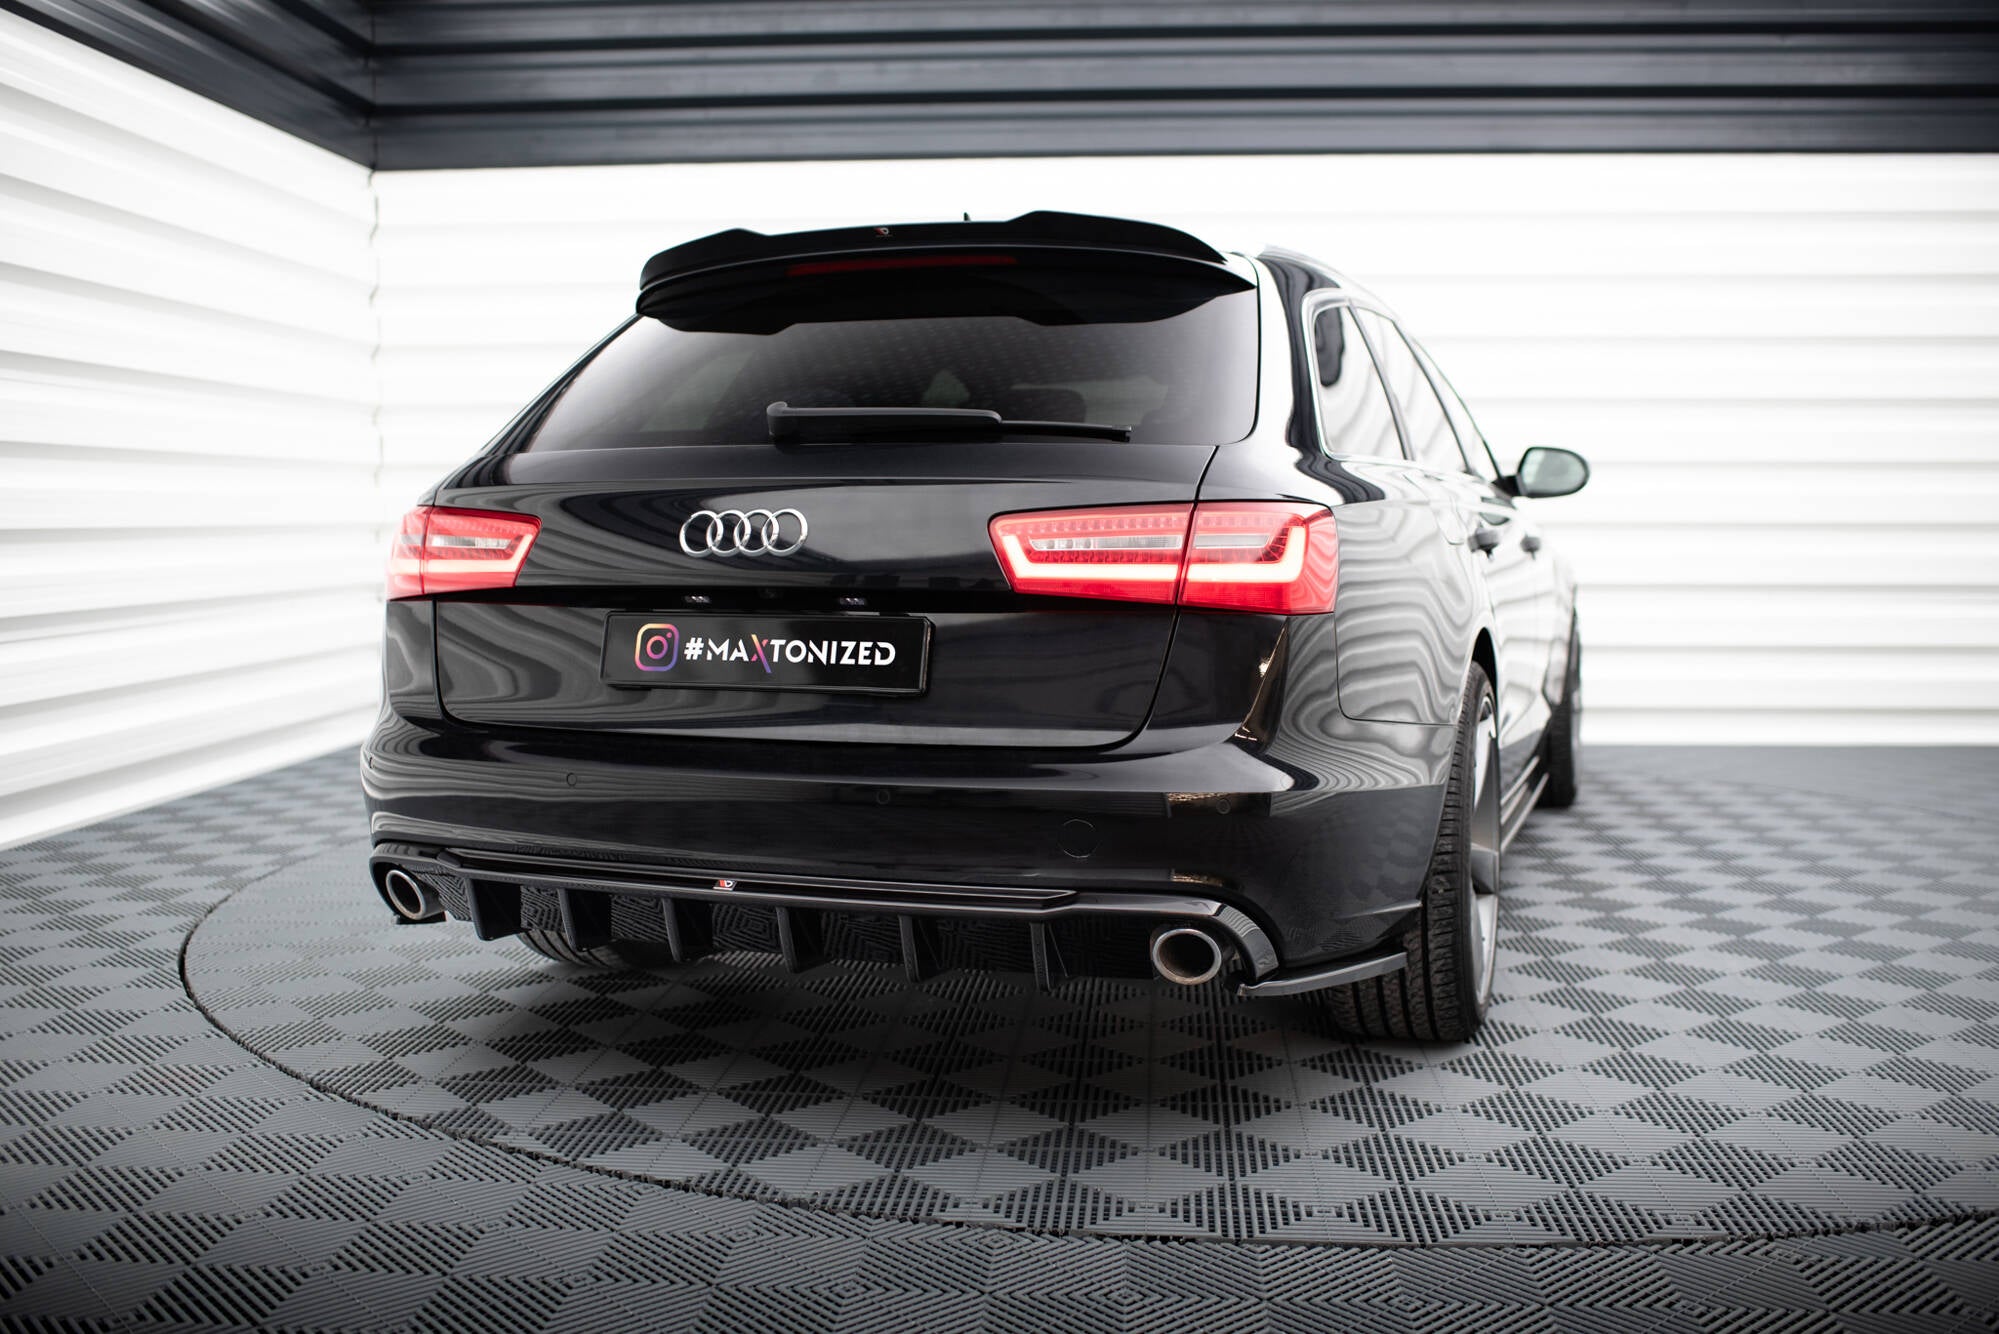 Rear Valance Audi A6 Avant C7 (Version with single exhausts on both sides)